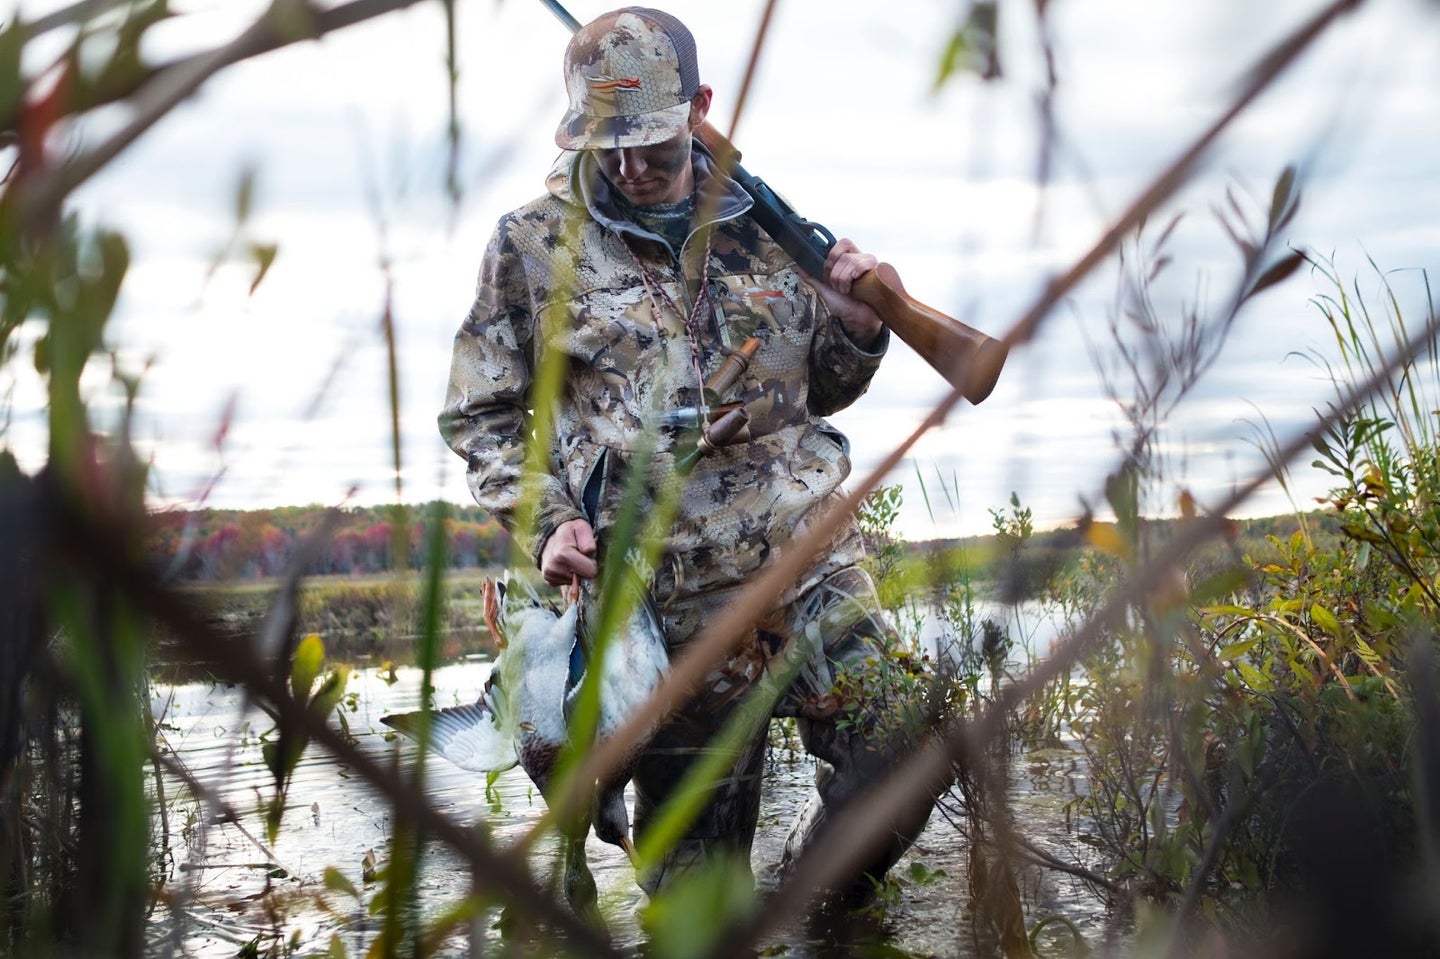 Hunter wearing Sitka duck hunting jacket, pants, and hat in the marsh